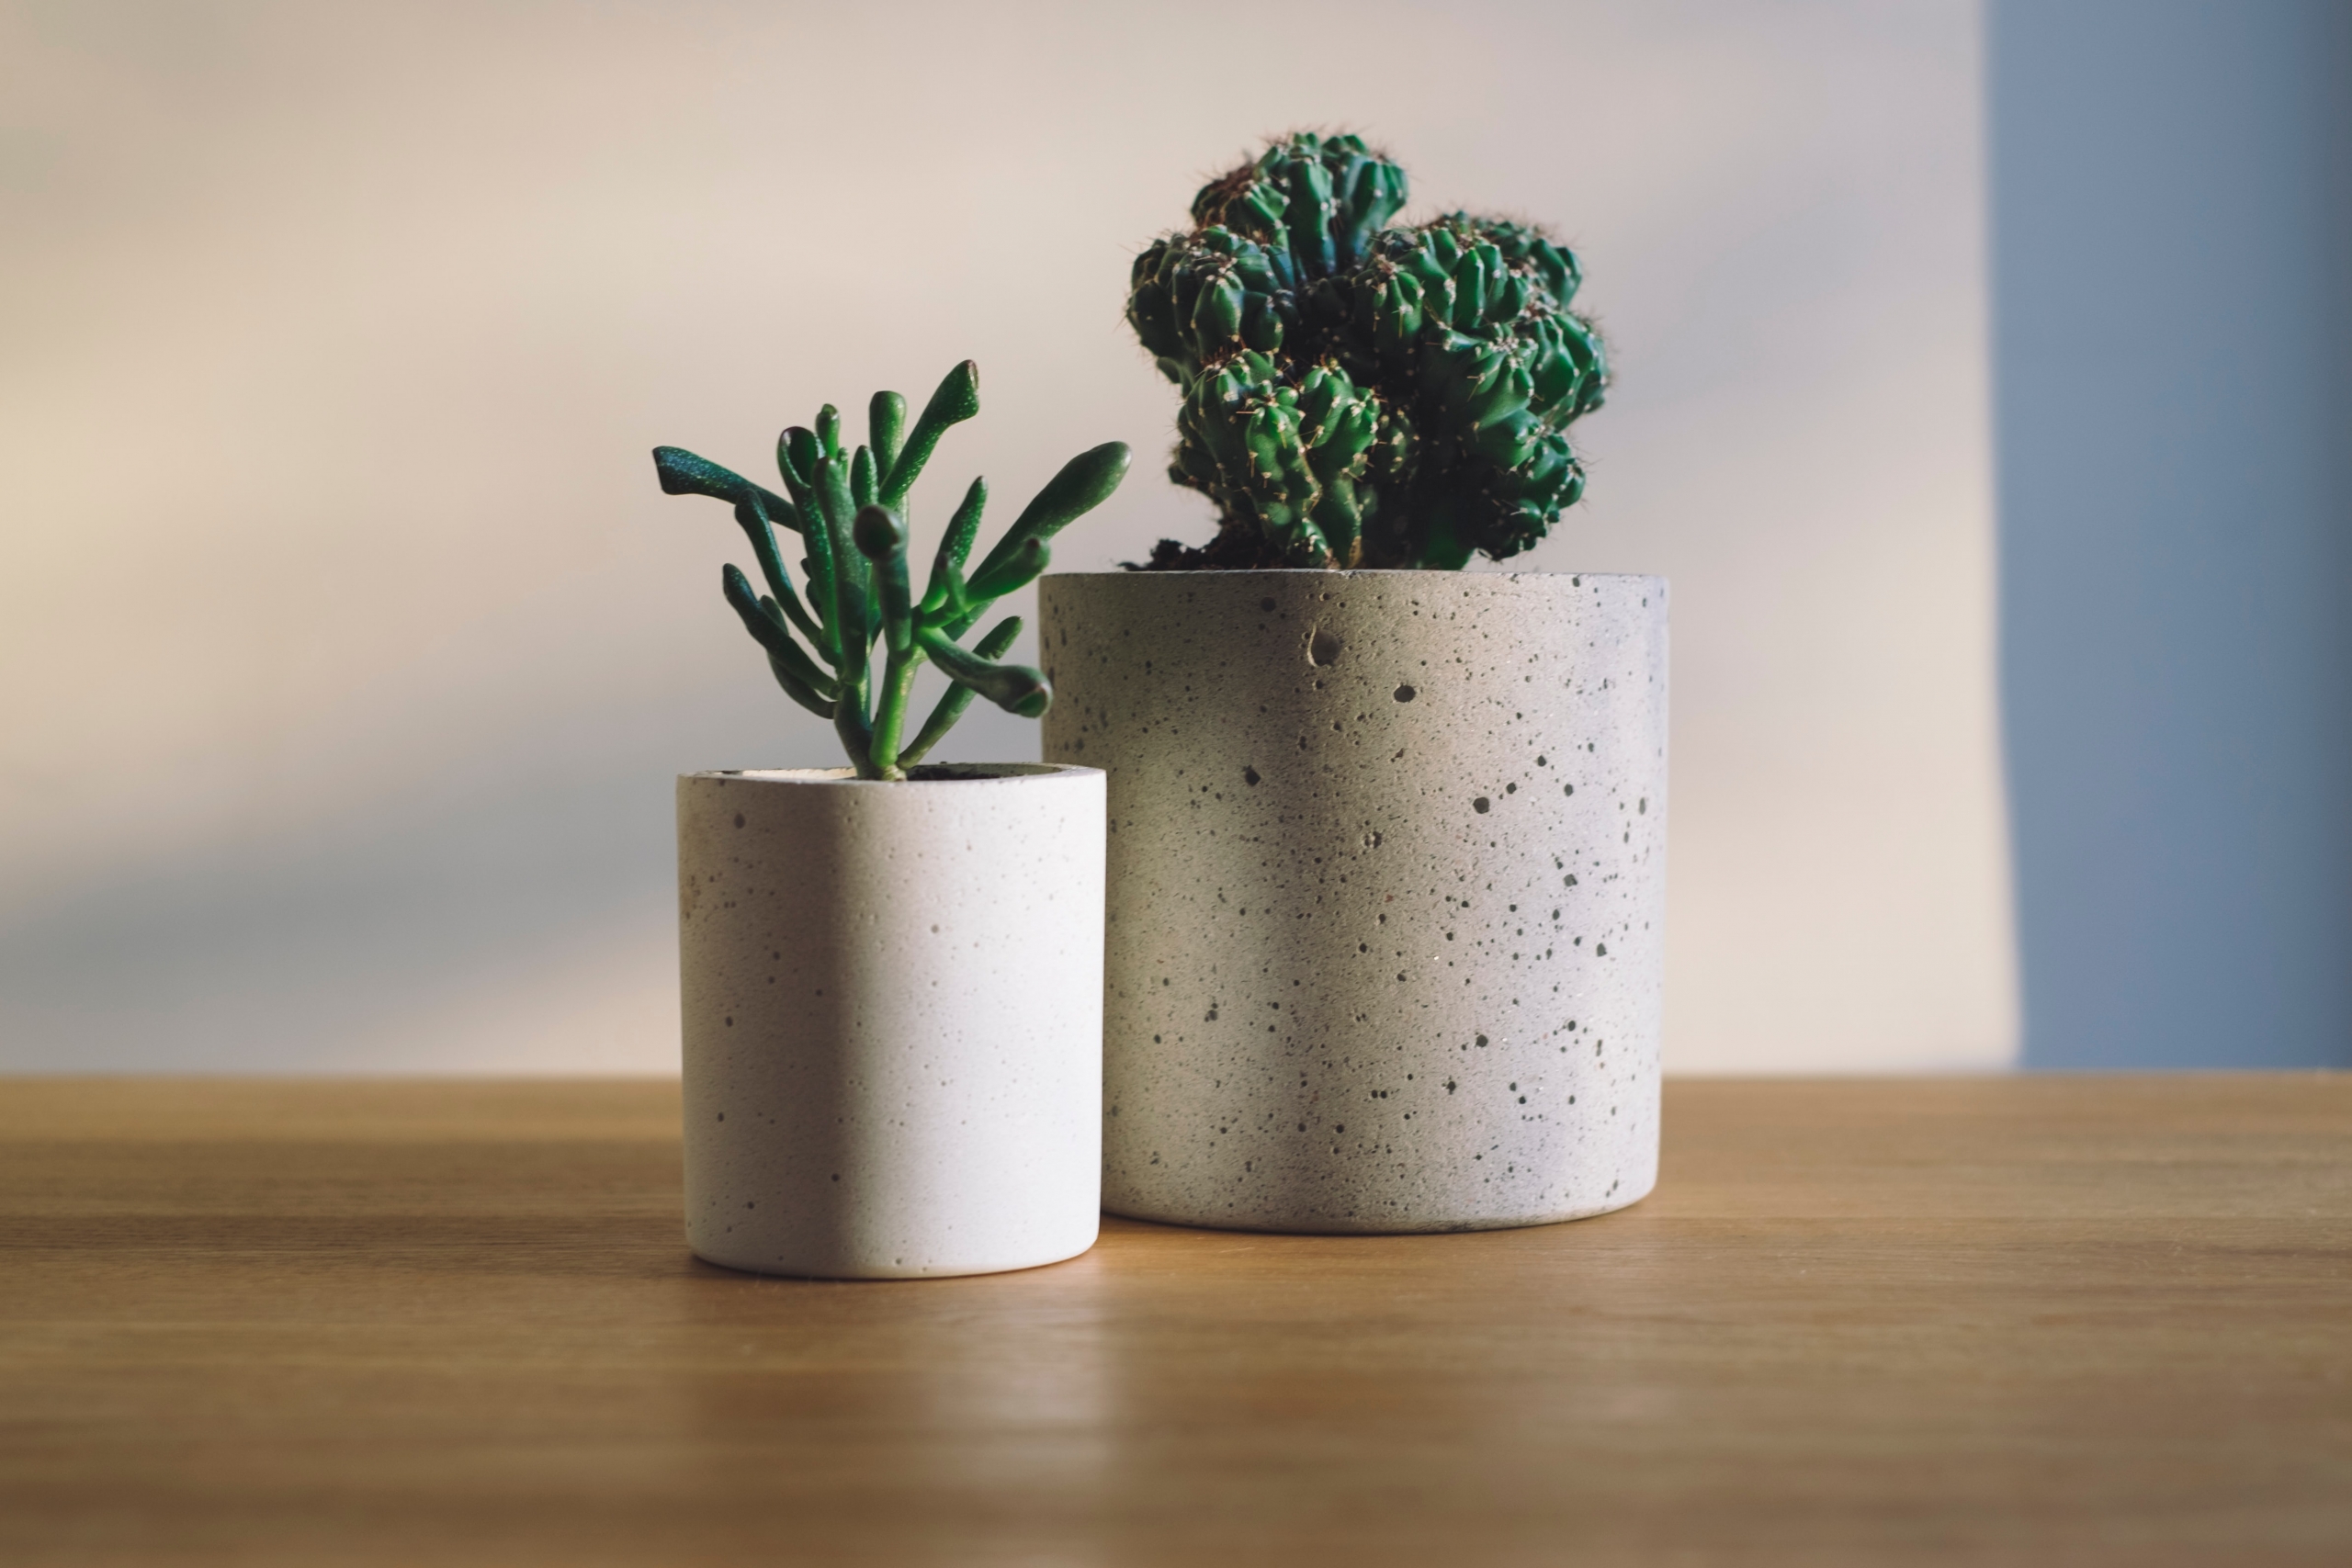 What flowers to plant in concrete pots?